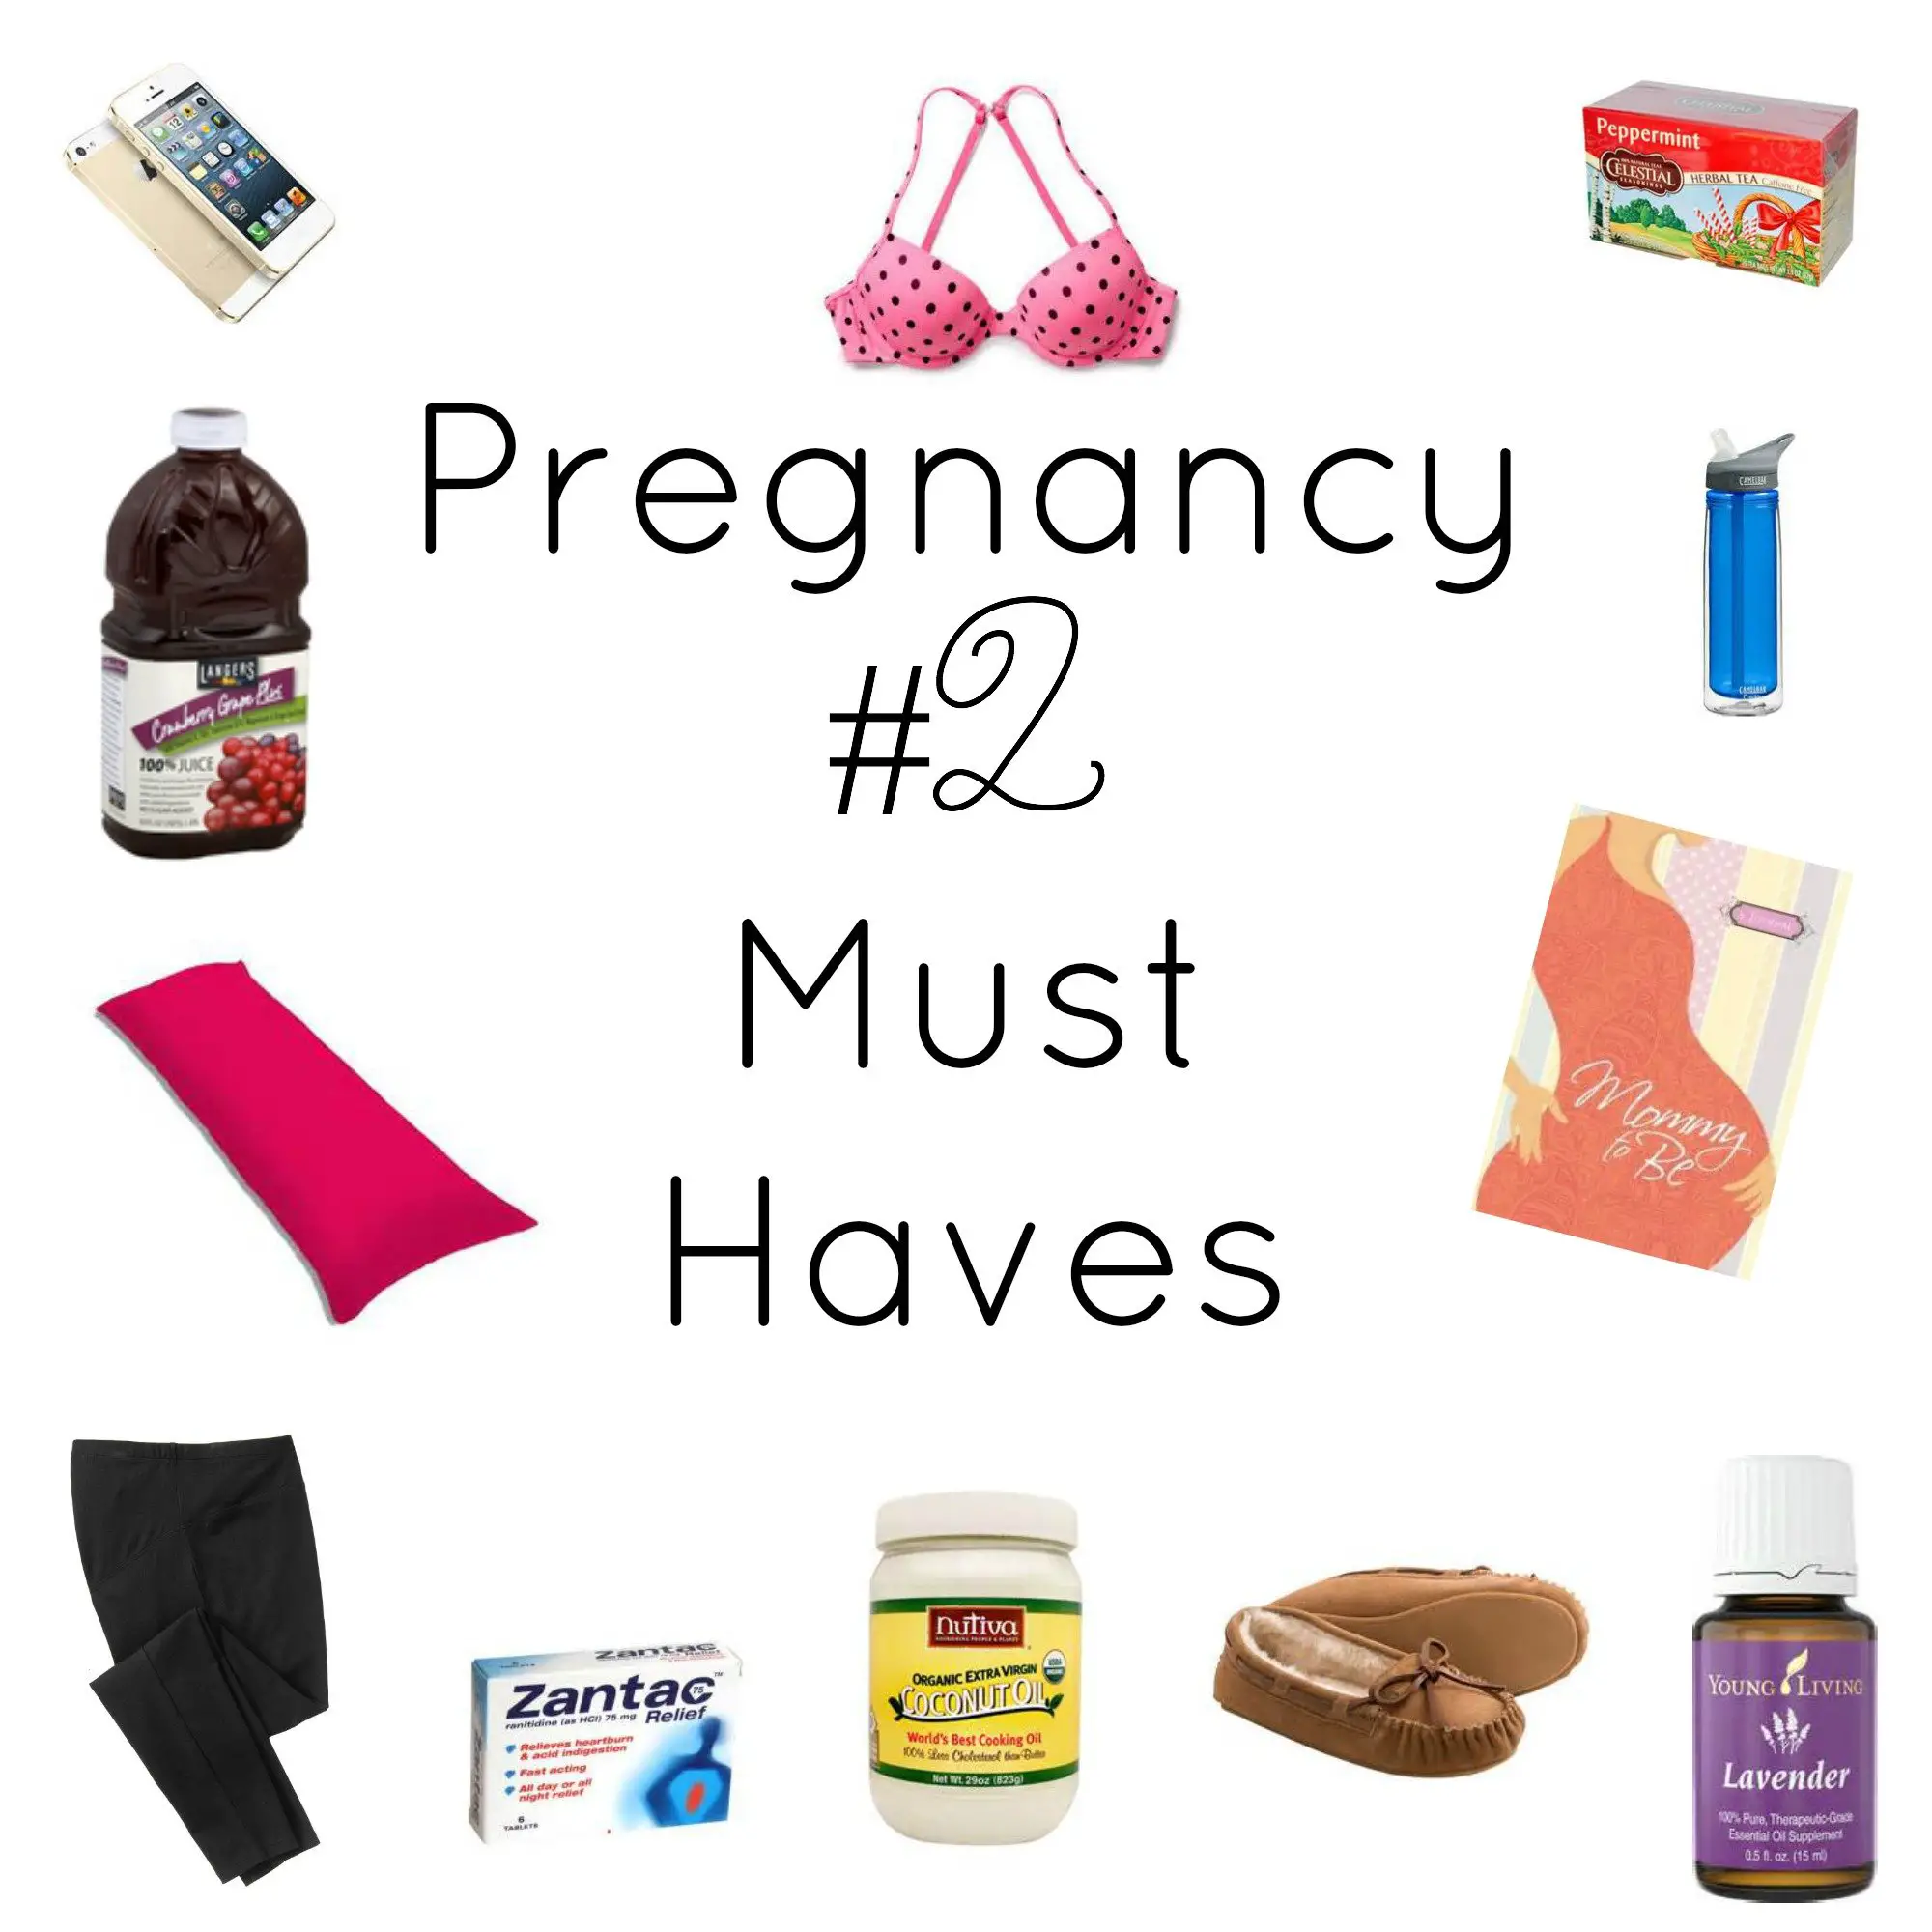 Pregnancy #2 Must Haves